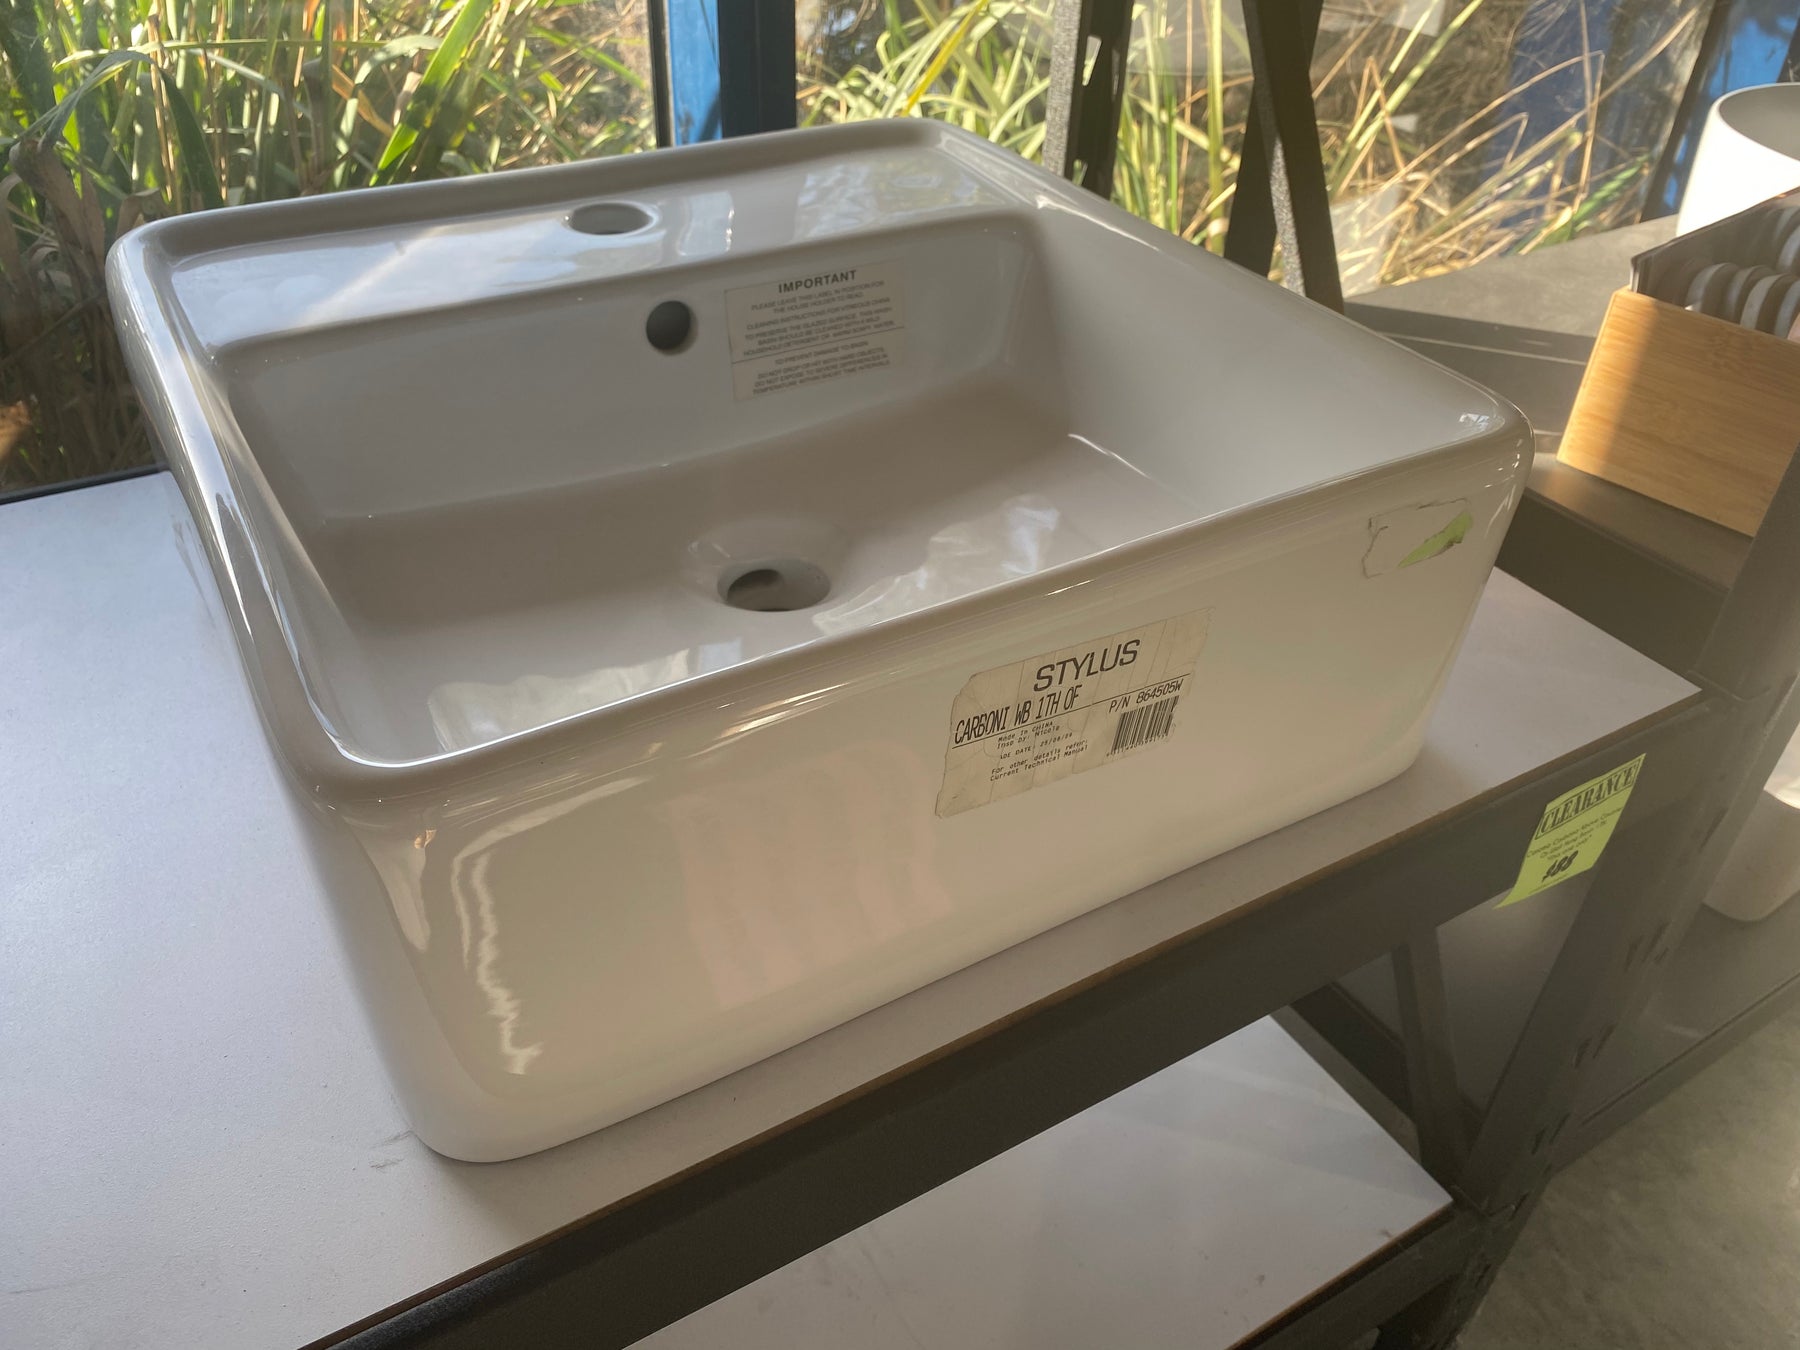 Carboni Above Counter Basin - $45